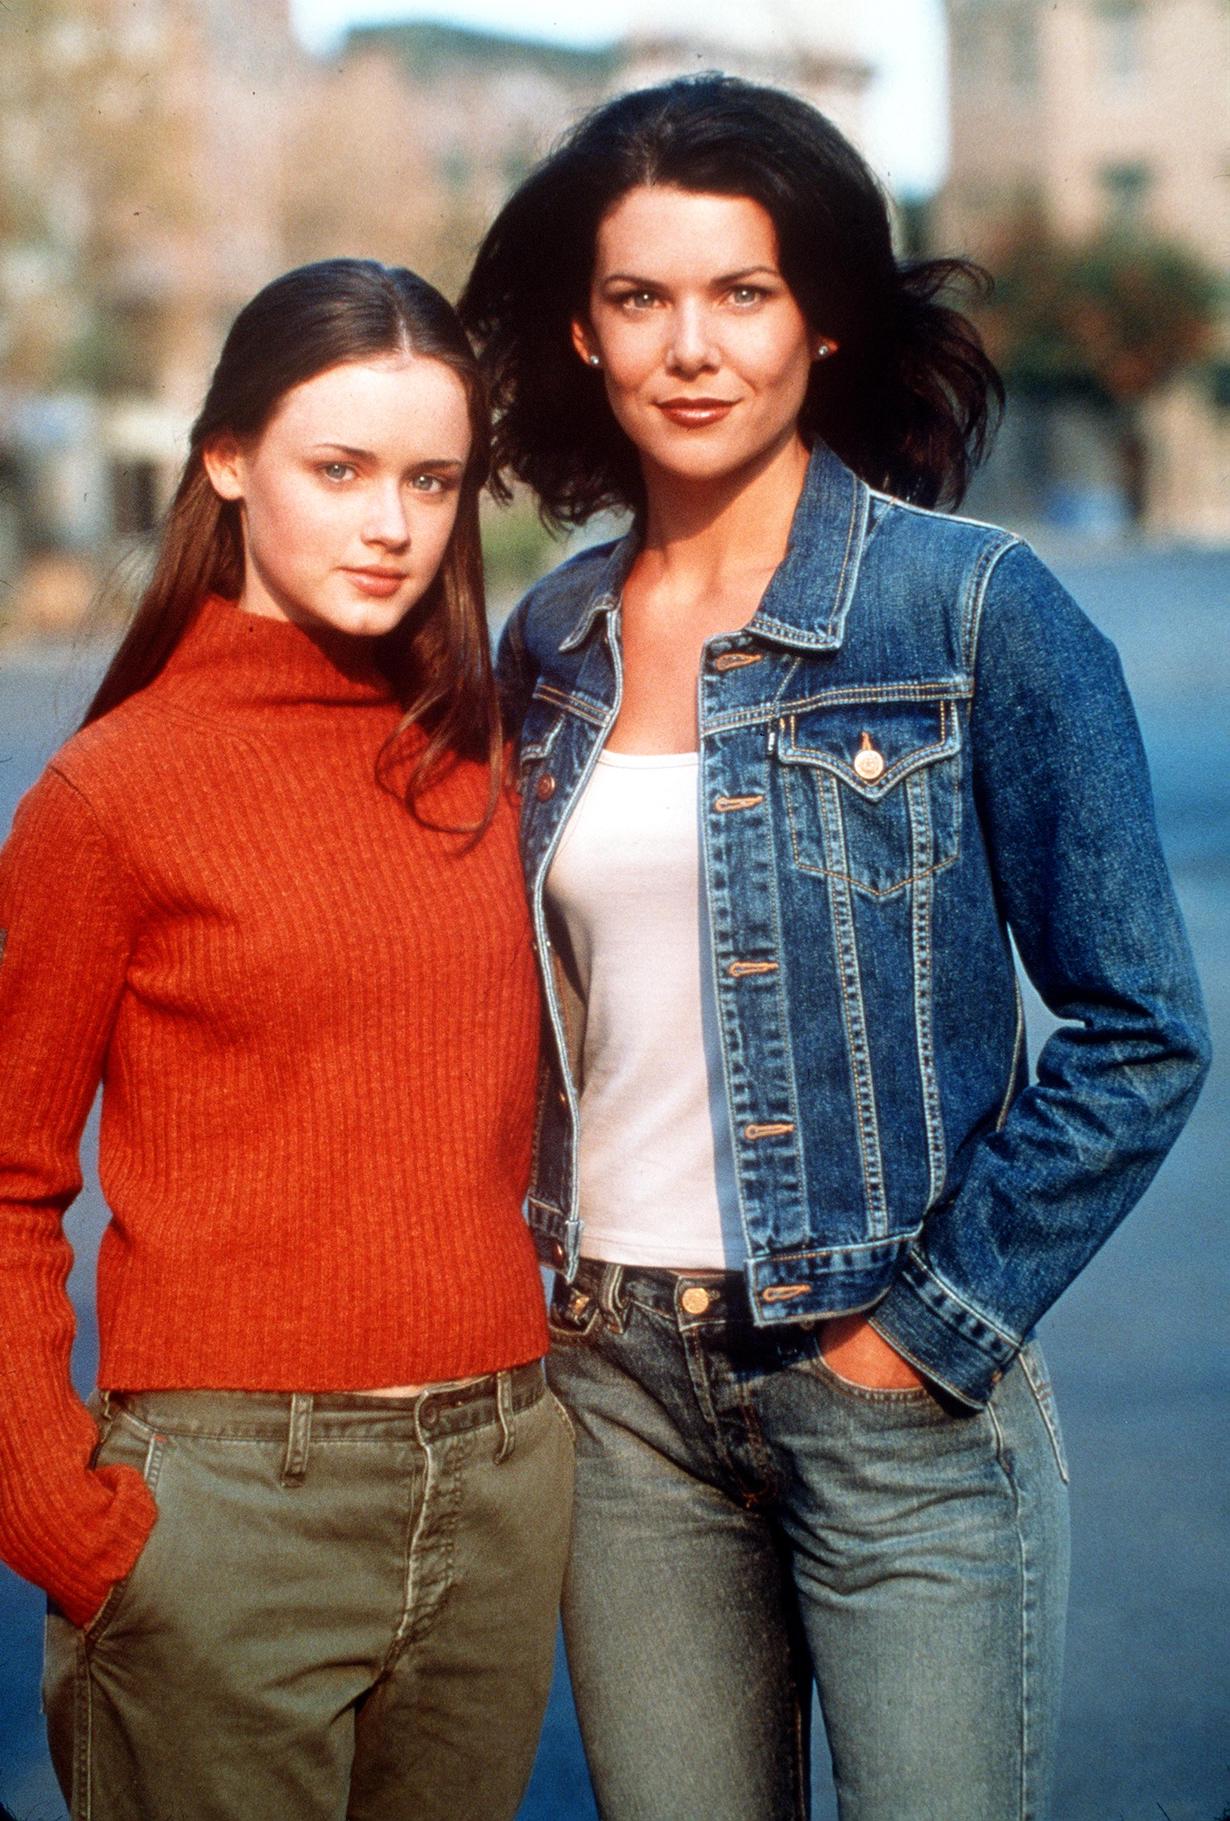 Alexis Bledel and Lauren Graham as Rory and Lorelai Gilmore on 'Gilmore Girls'